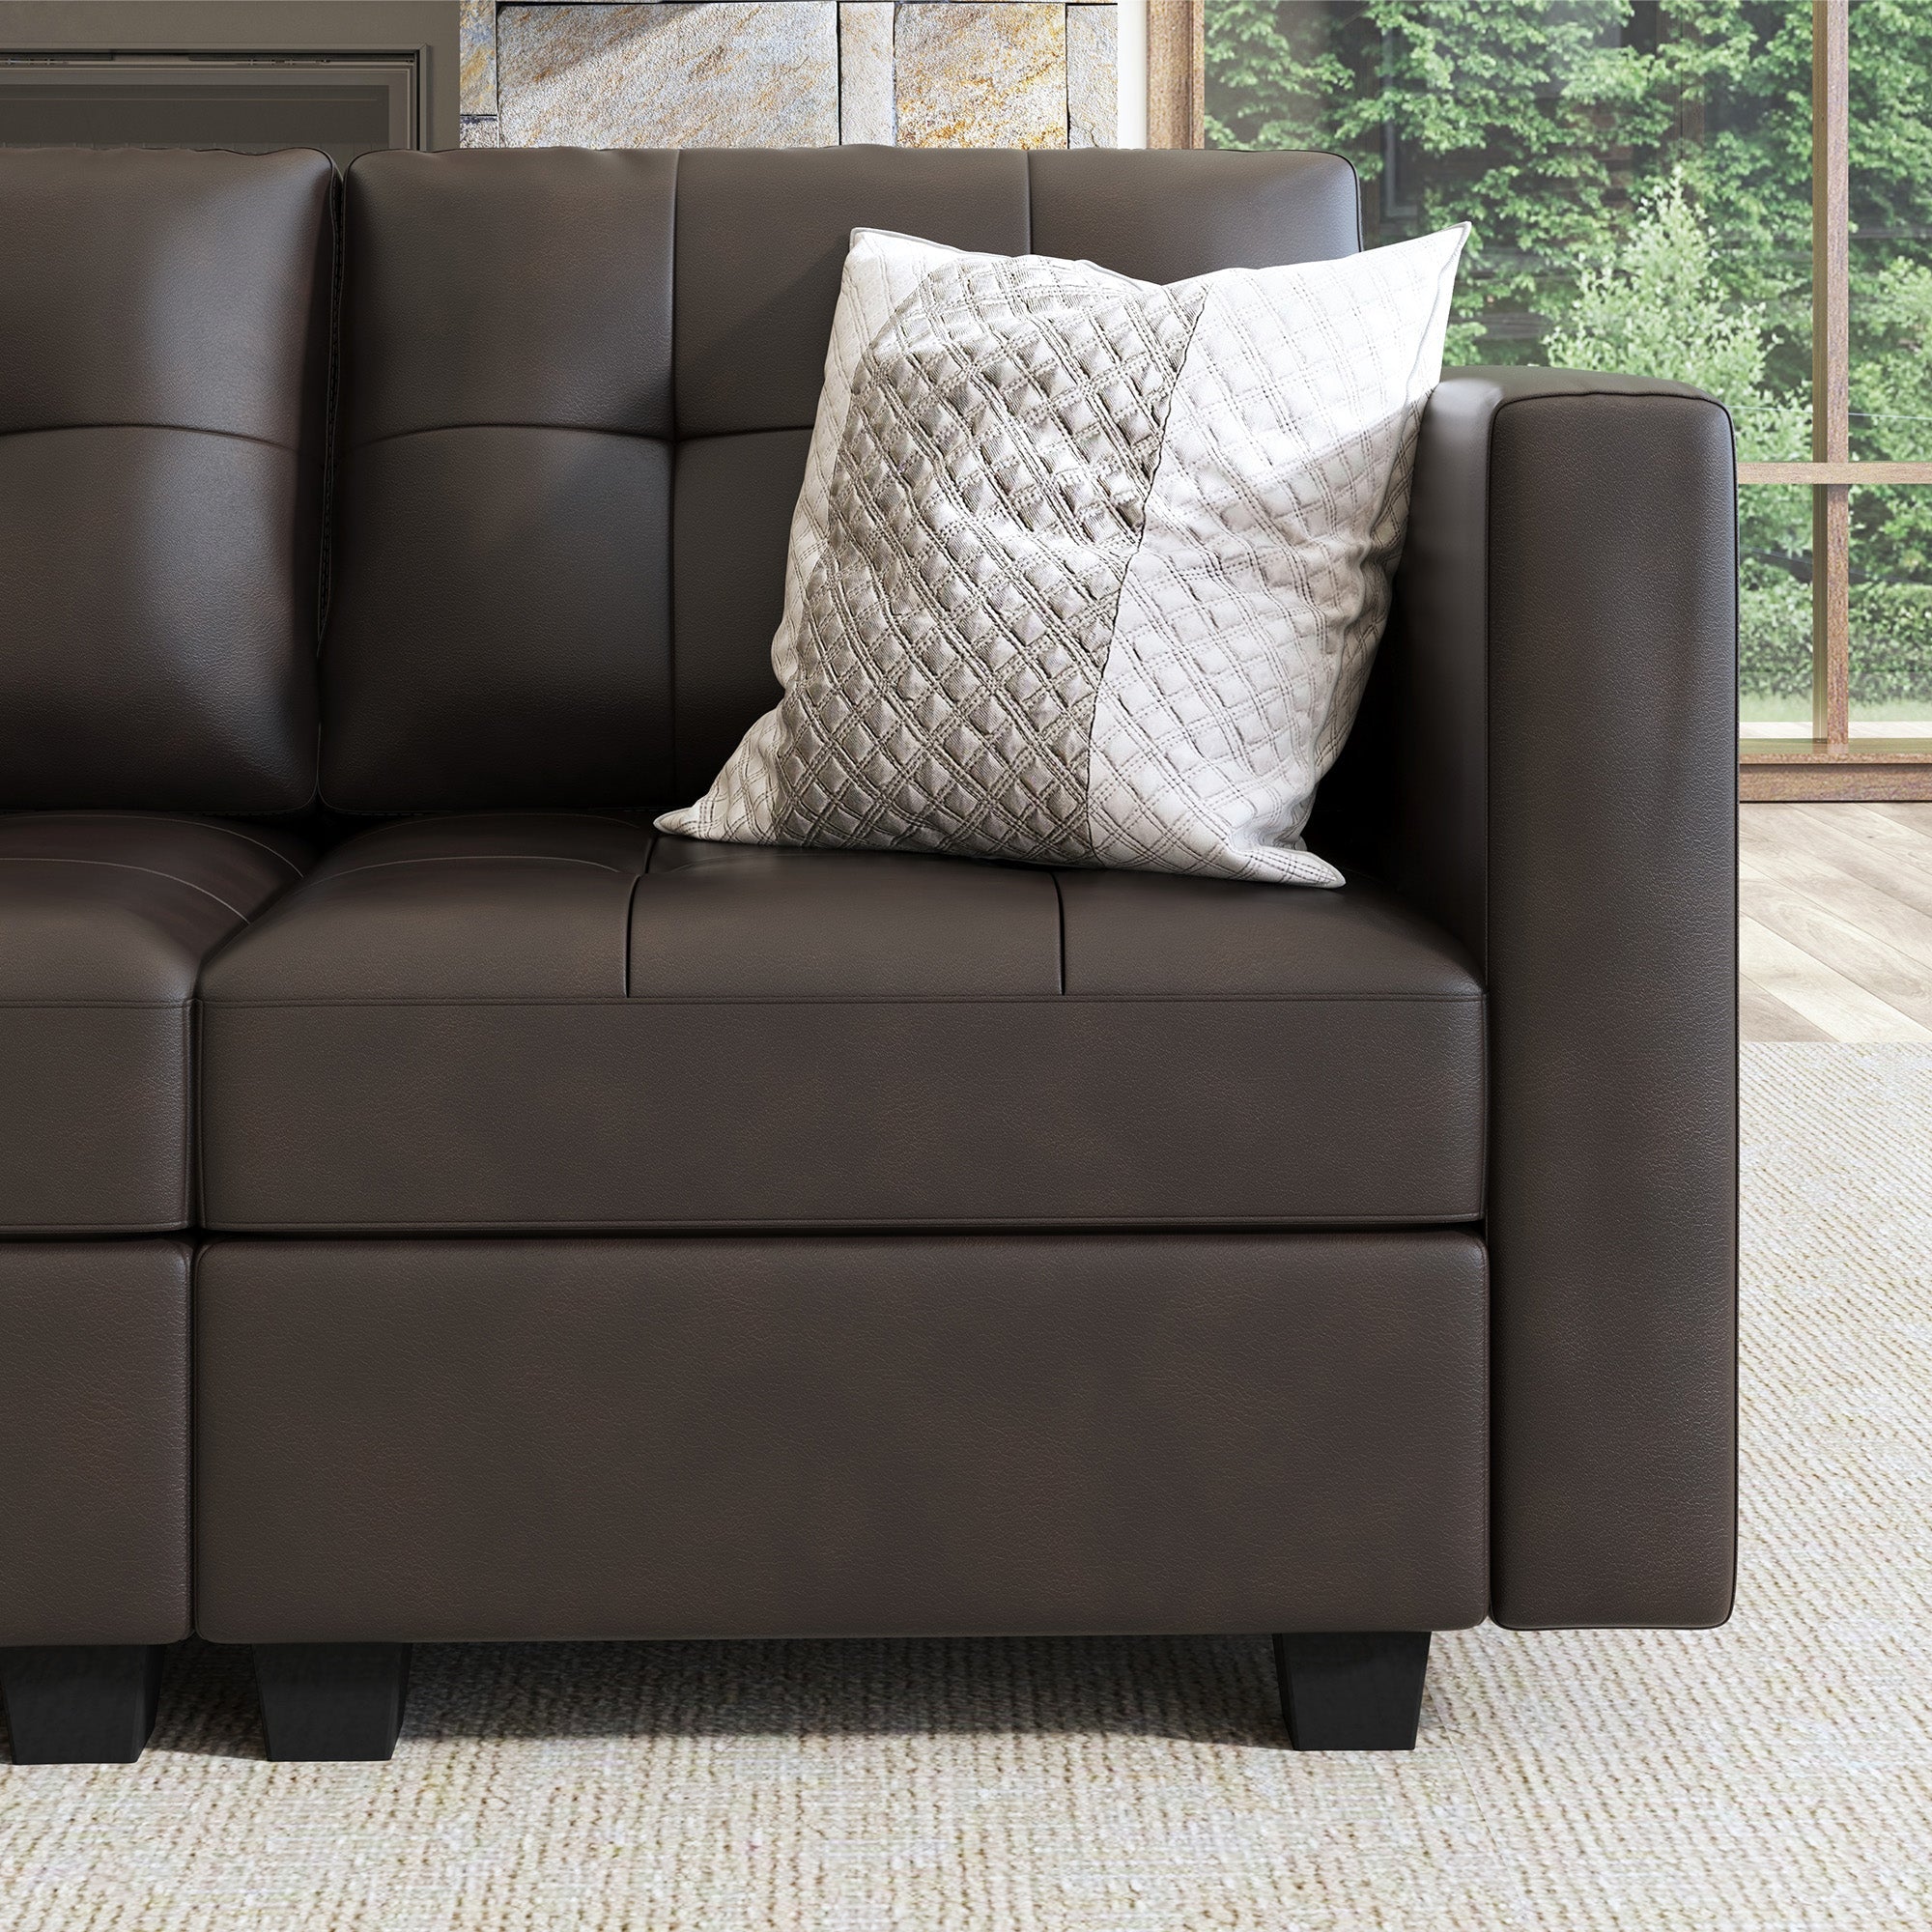 HONBAY 7-Piece Faux Leather Modular Sectional With Storage Seat